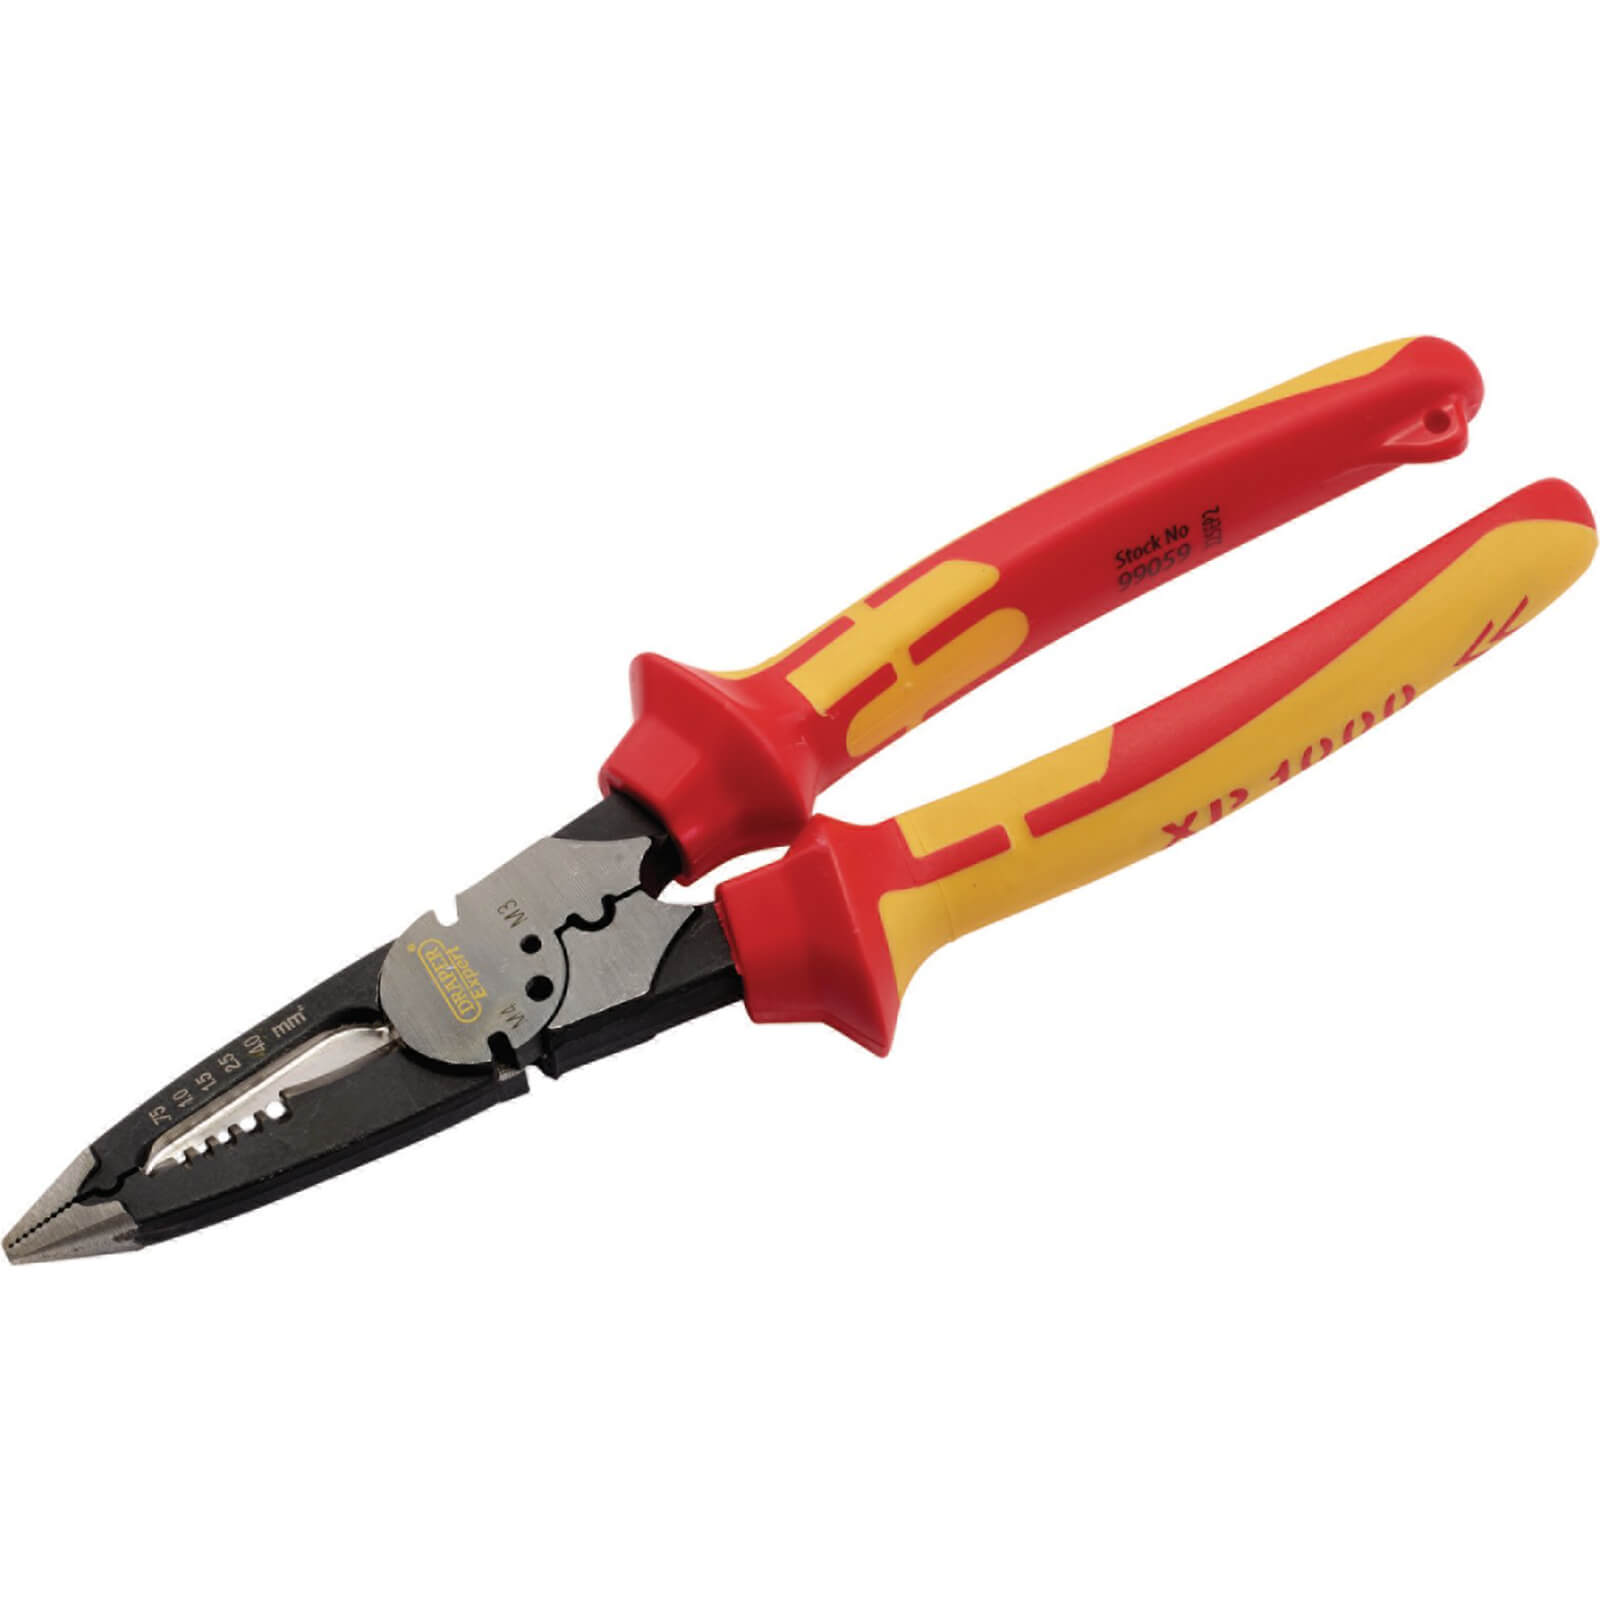 Photo of Draper Xp1000 Vde Insulated Tethered Multi Purpose Pliers 200mm